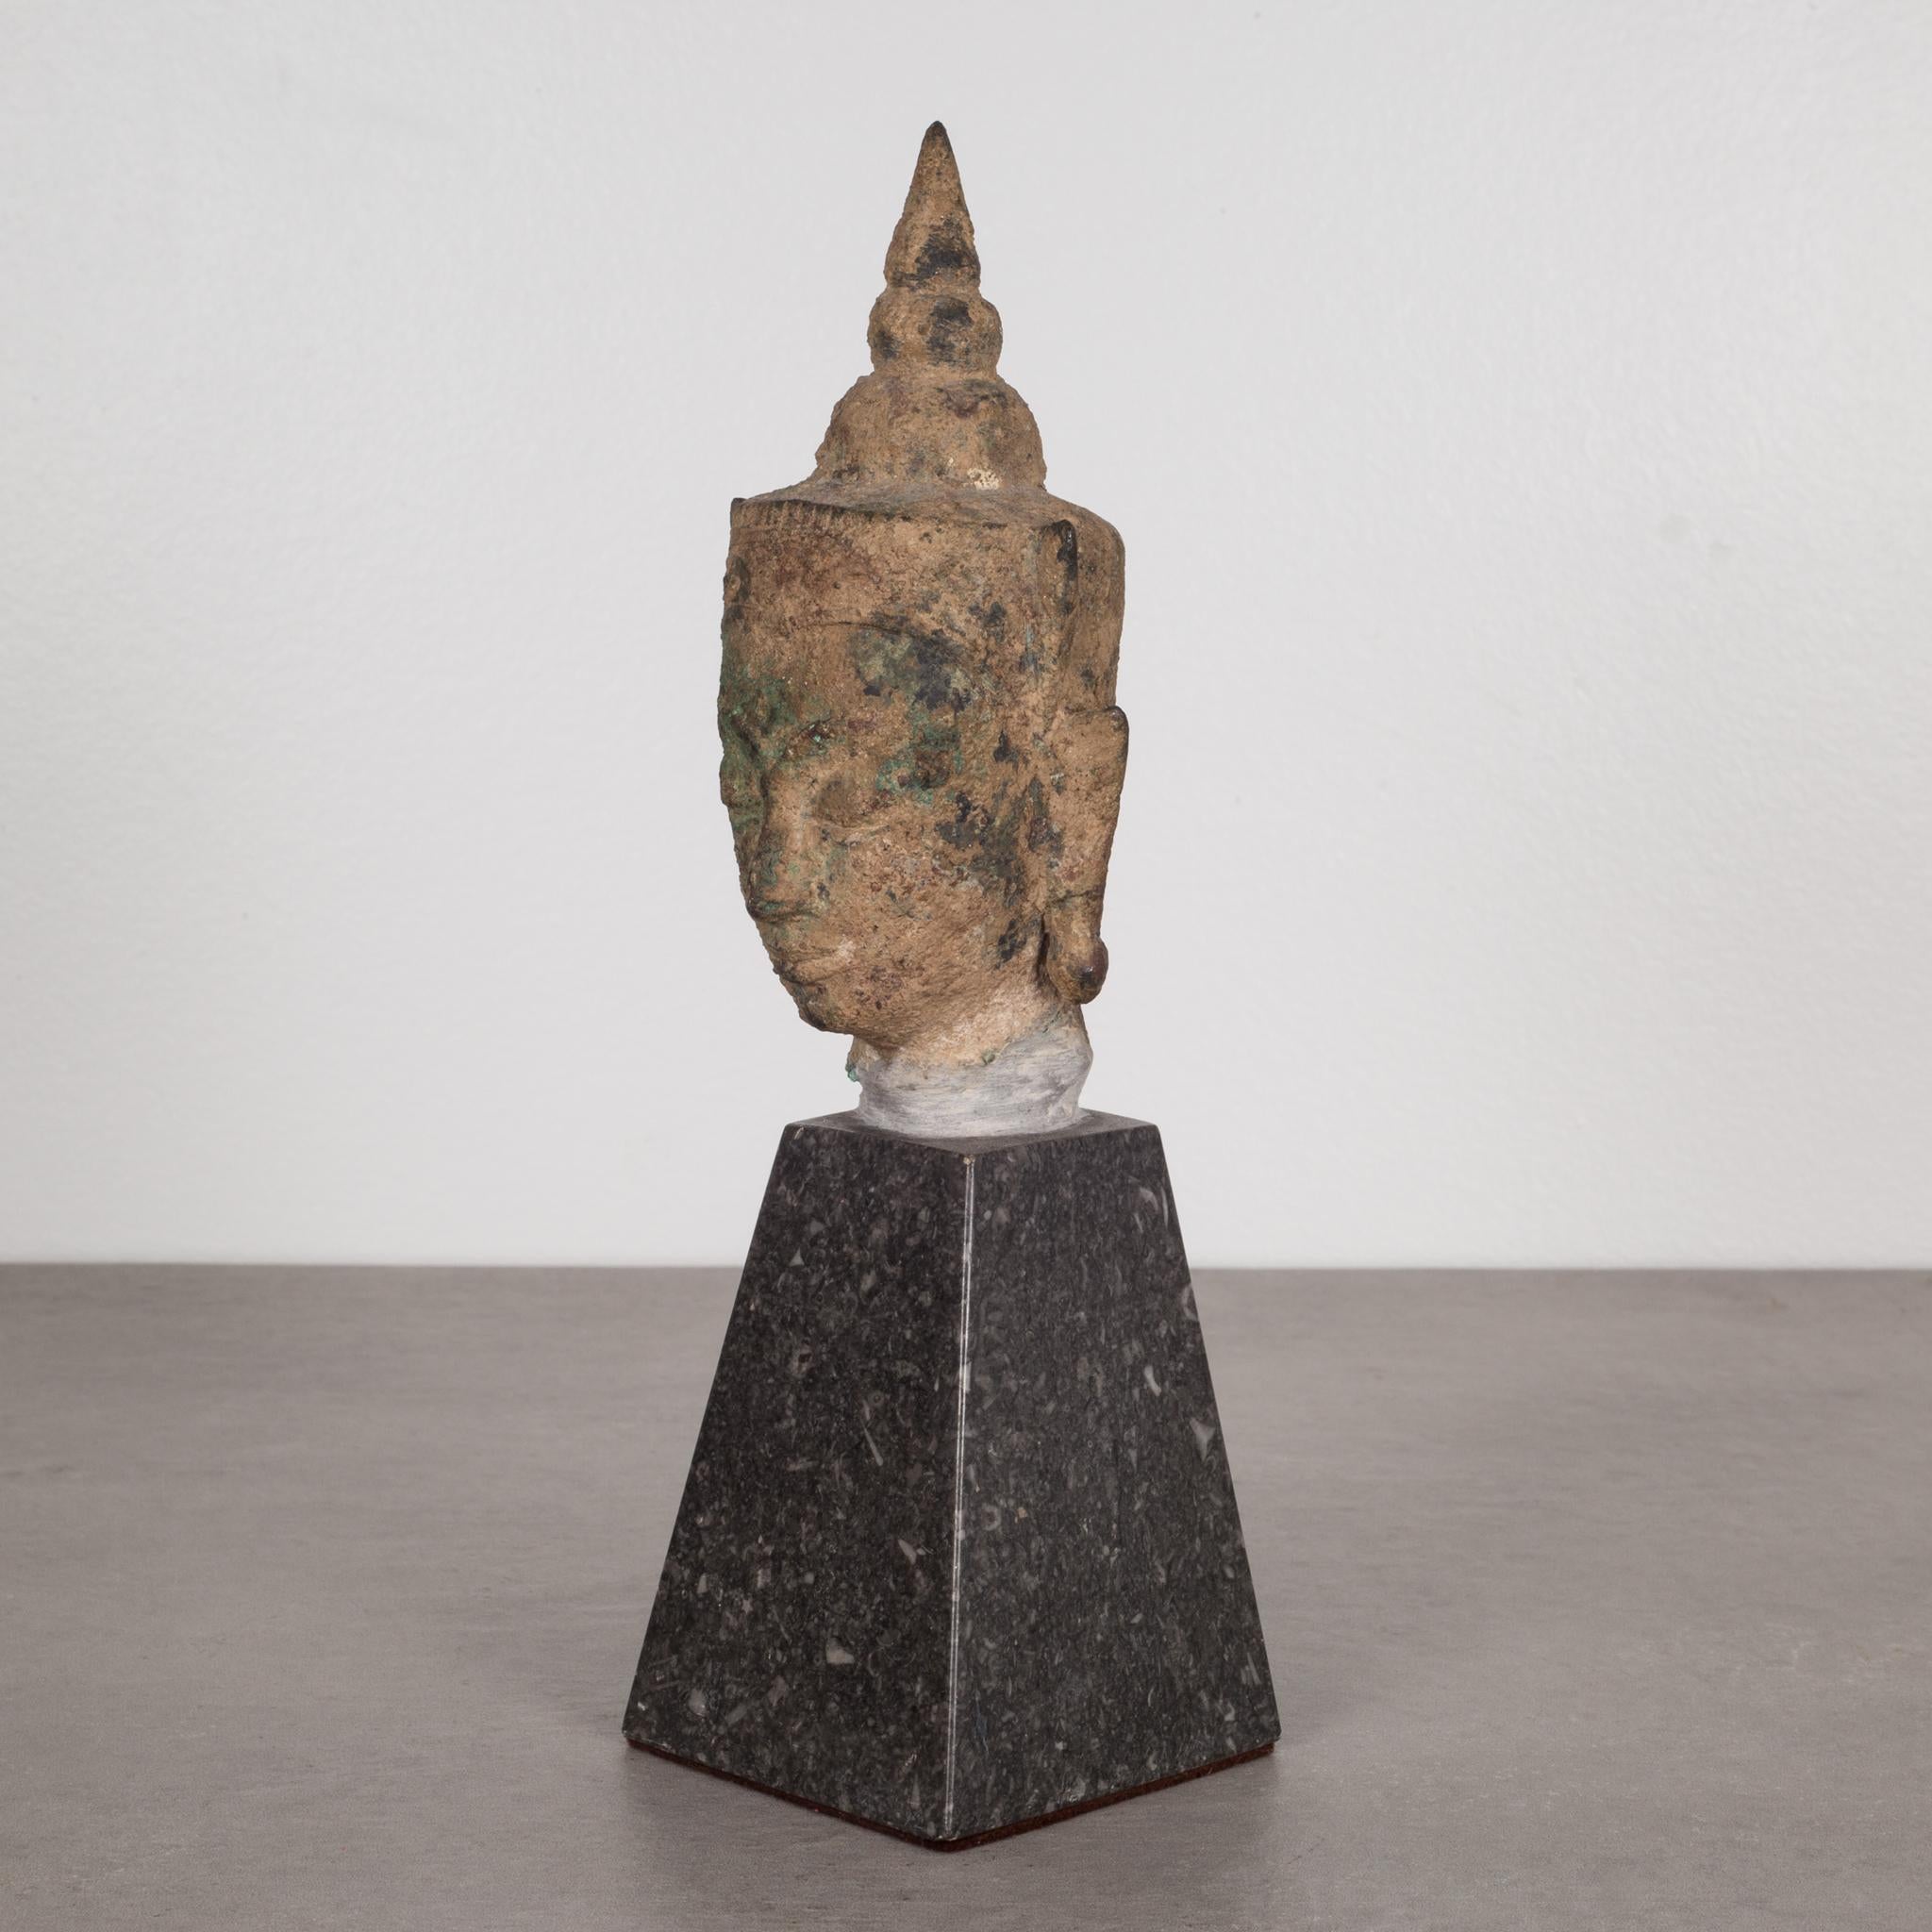 About

This is an original lost-wax casting bronze head of Buddah Shakyamuni from the 19th century, Thailand. It is mounted on a contemporary marble base. His meditative expression, arched eyebrows, downcast eyes, smiling lips, elongated earlobes